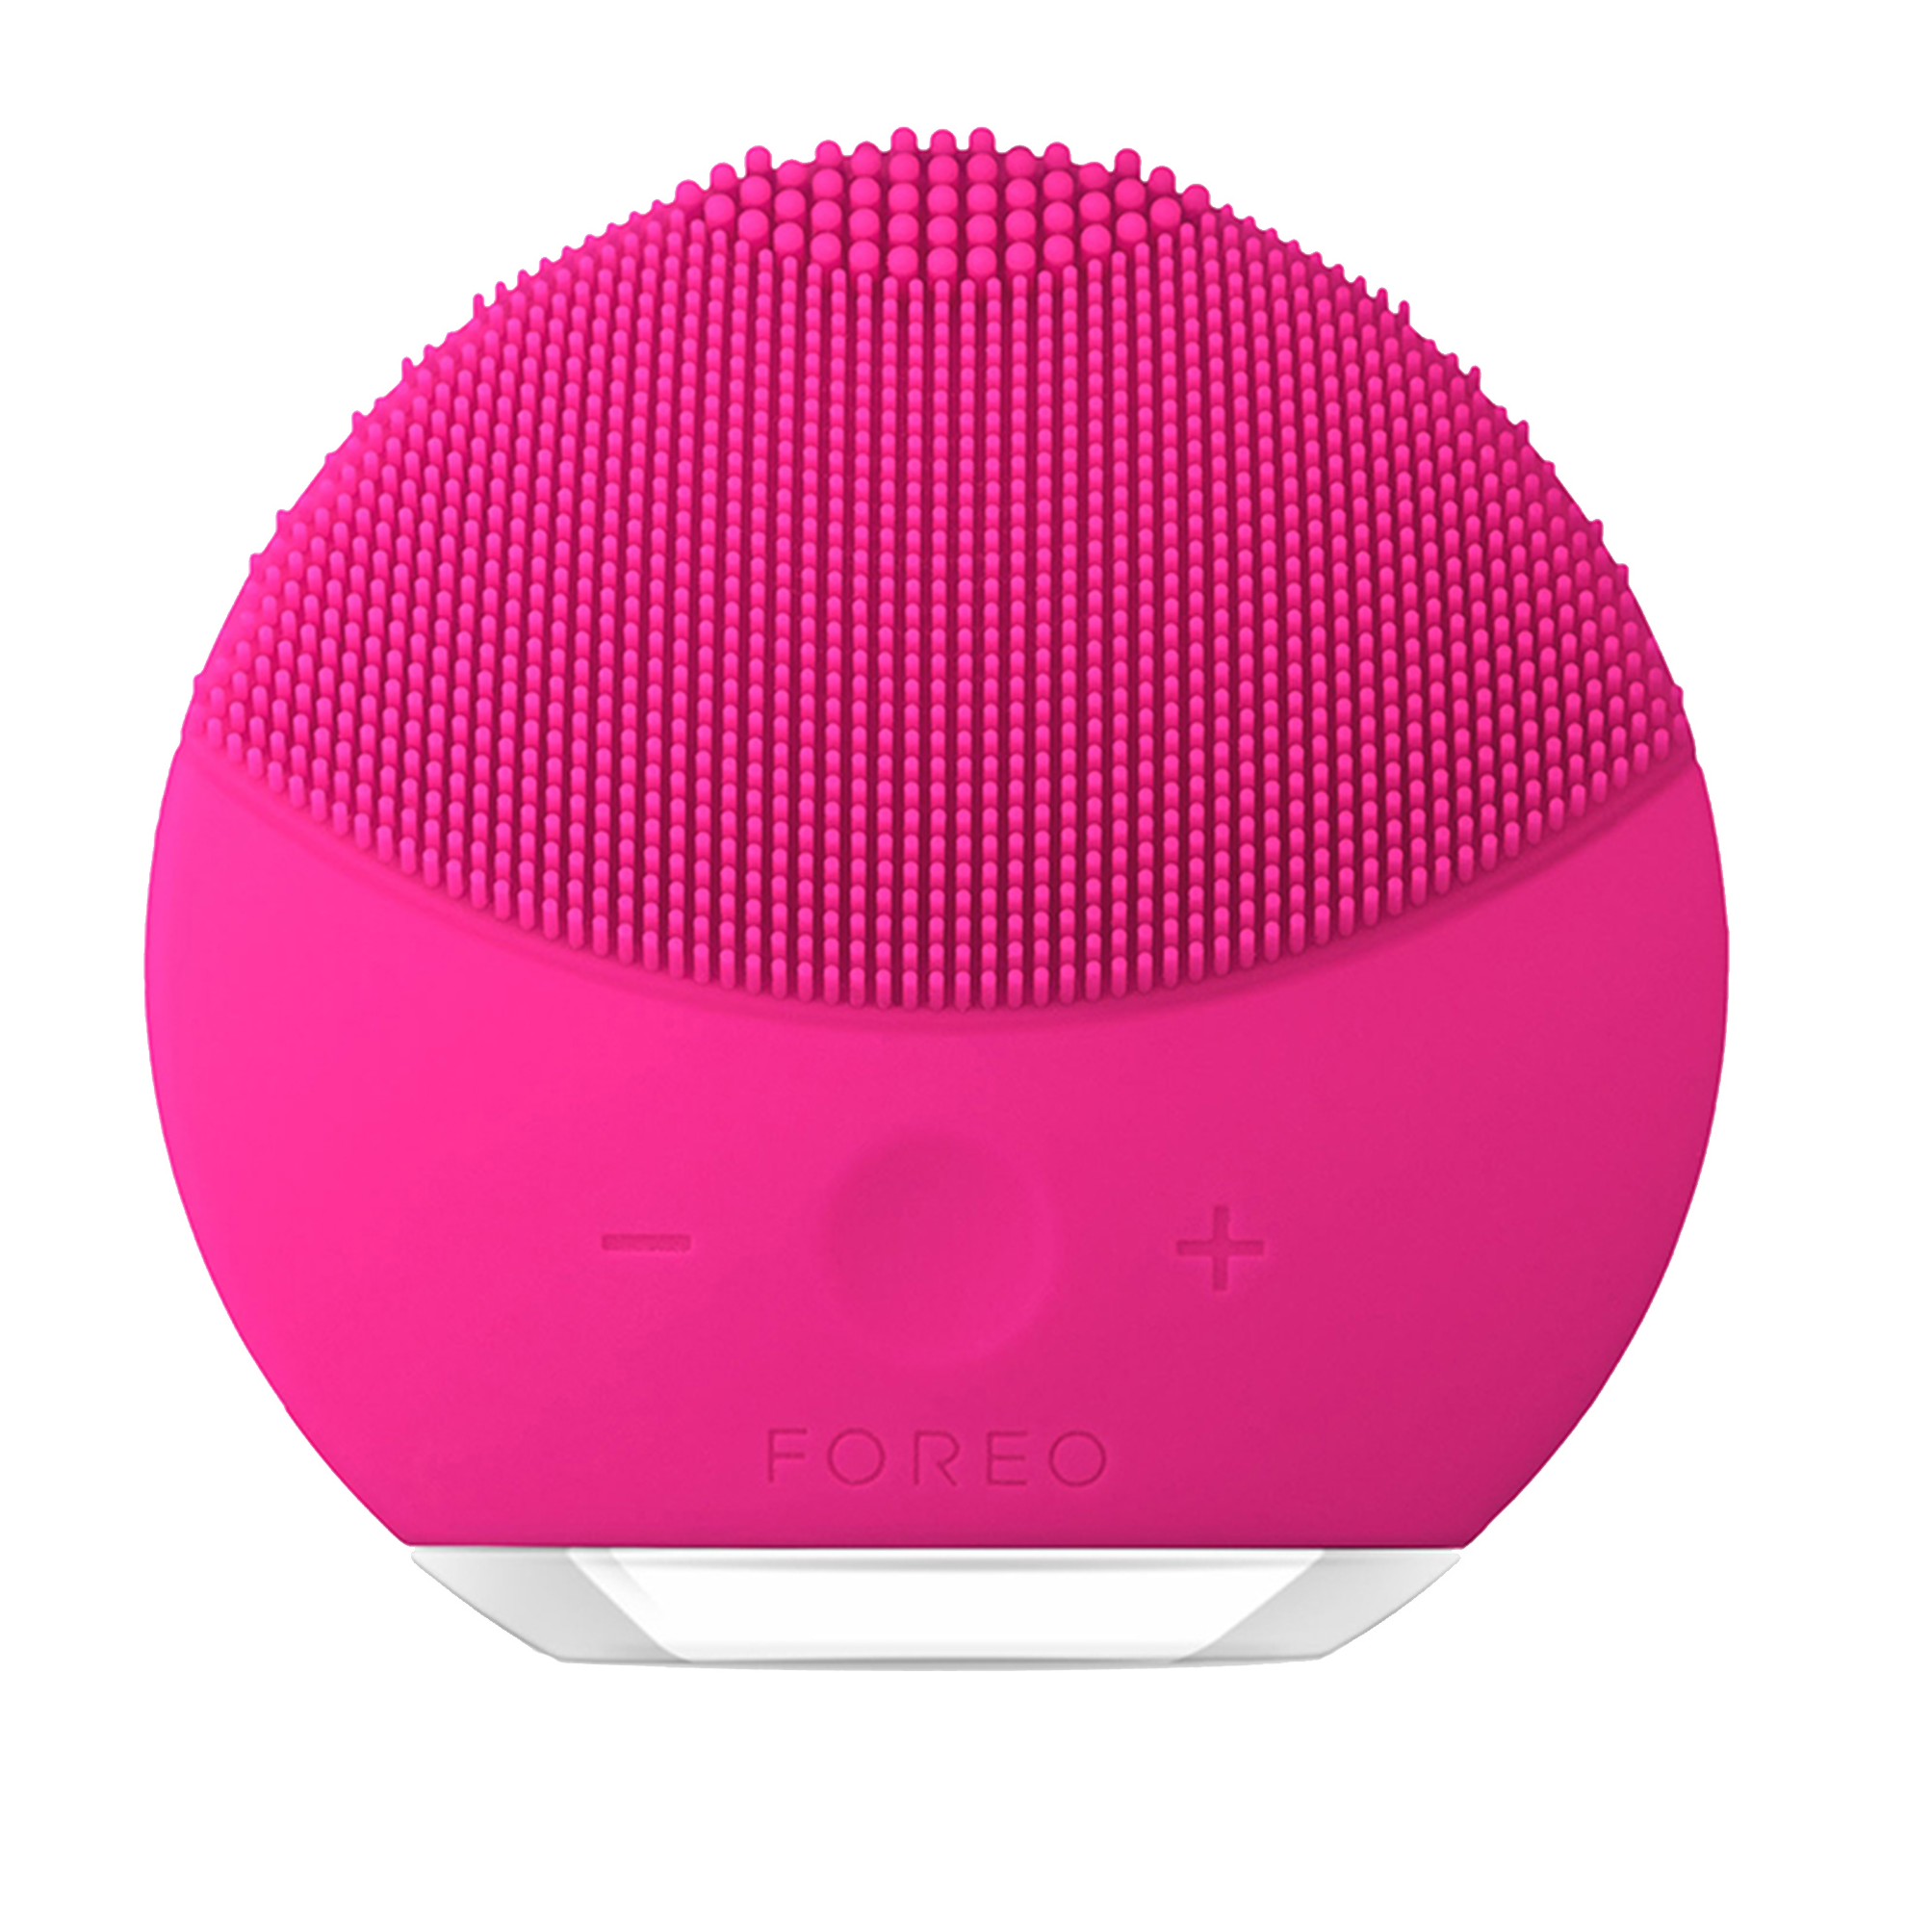 LUNA Mini 2 - Fuchsia by Foreo for Women - 1 Pc Cleansing Brush - image 1 of 6